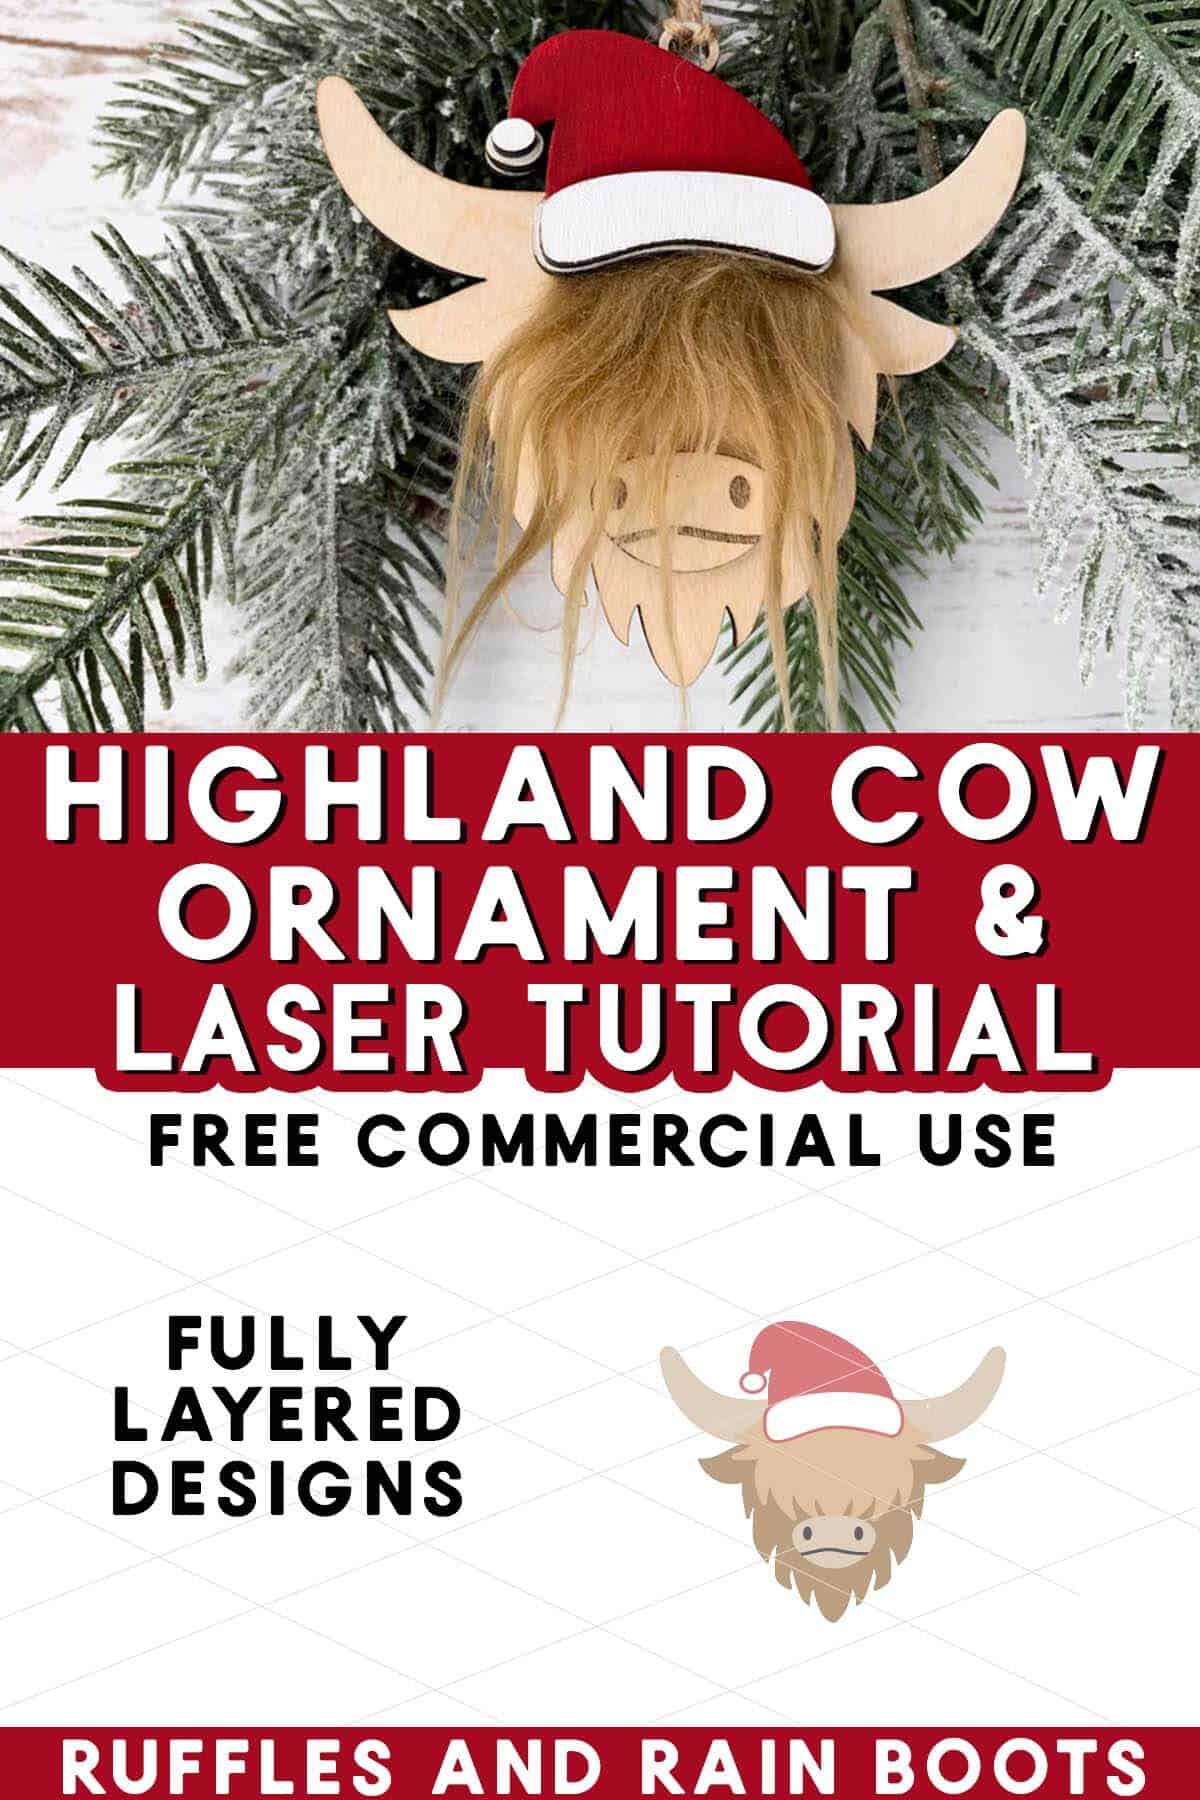 Split vertical image showing a Scottish highland cow ornament wearing a Santa hat with text which reads highland cow ornament and l aser tutorial.